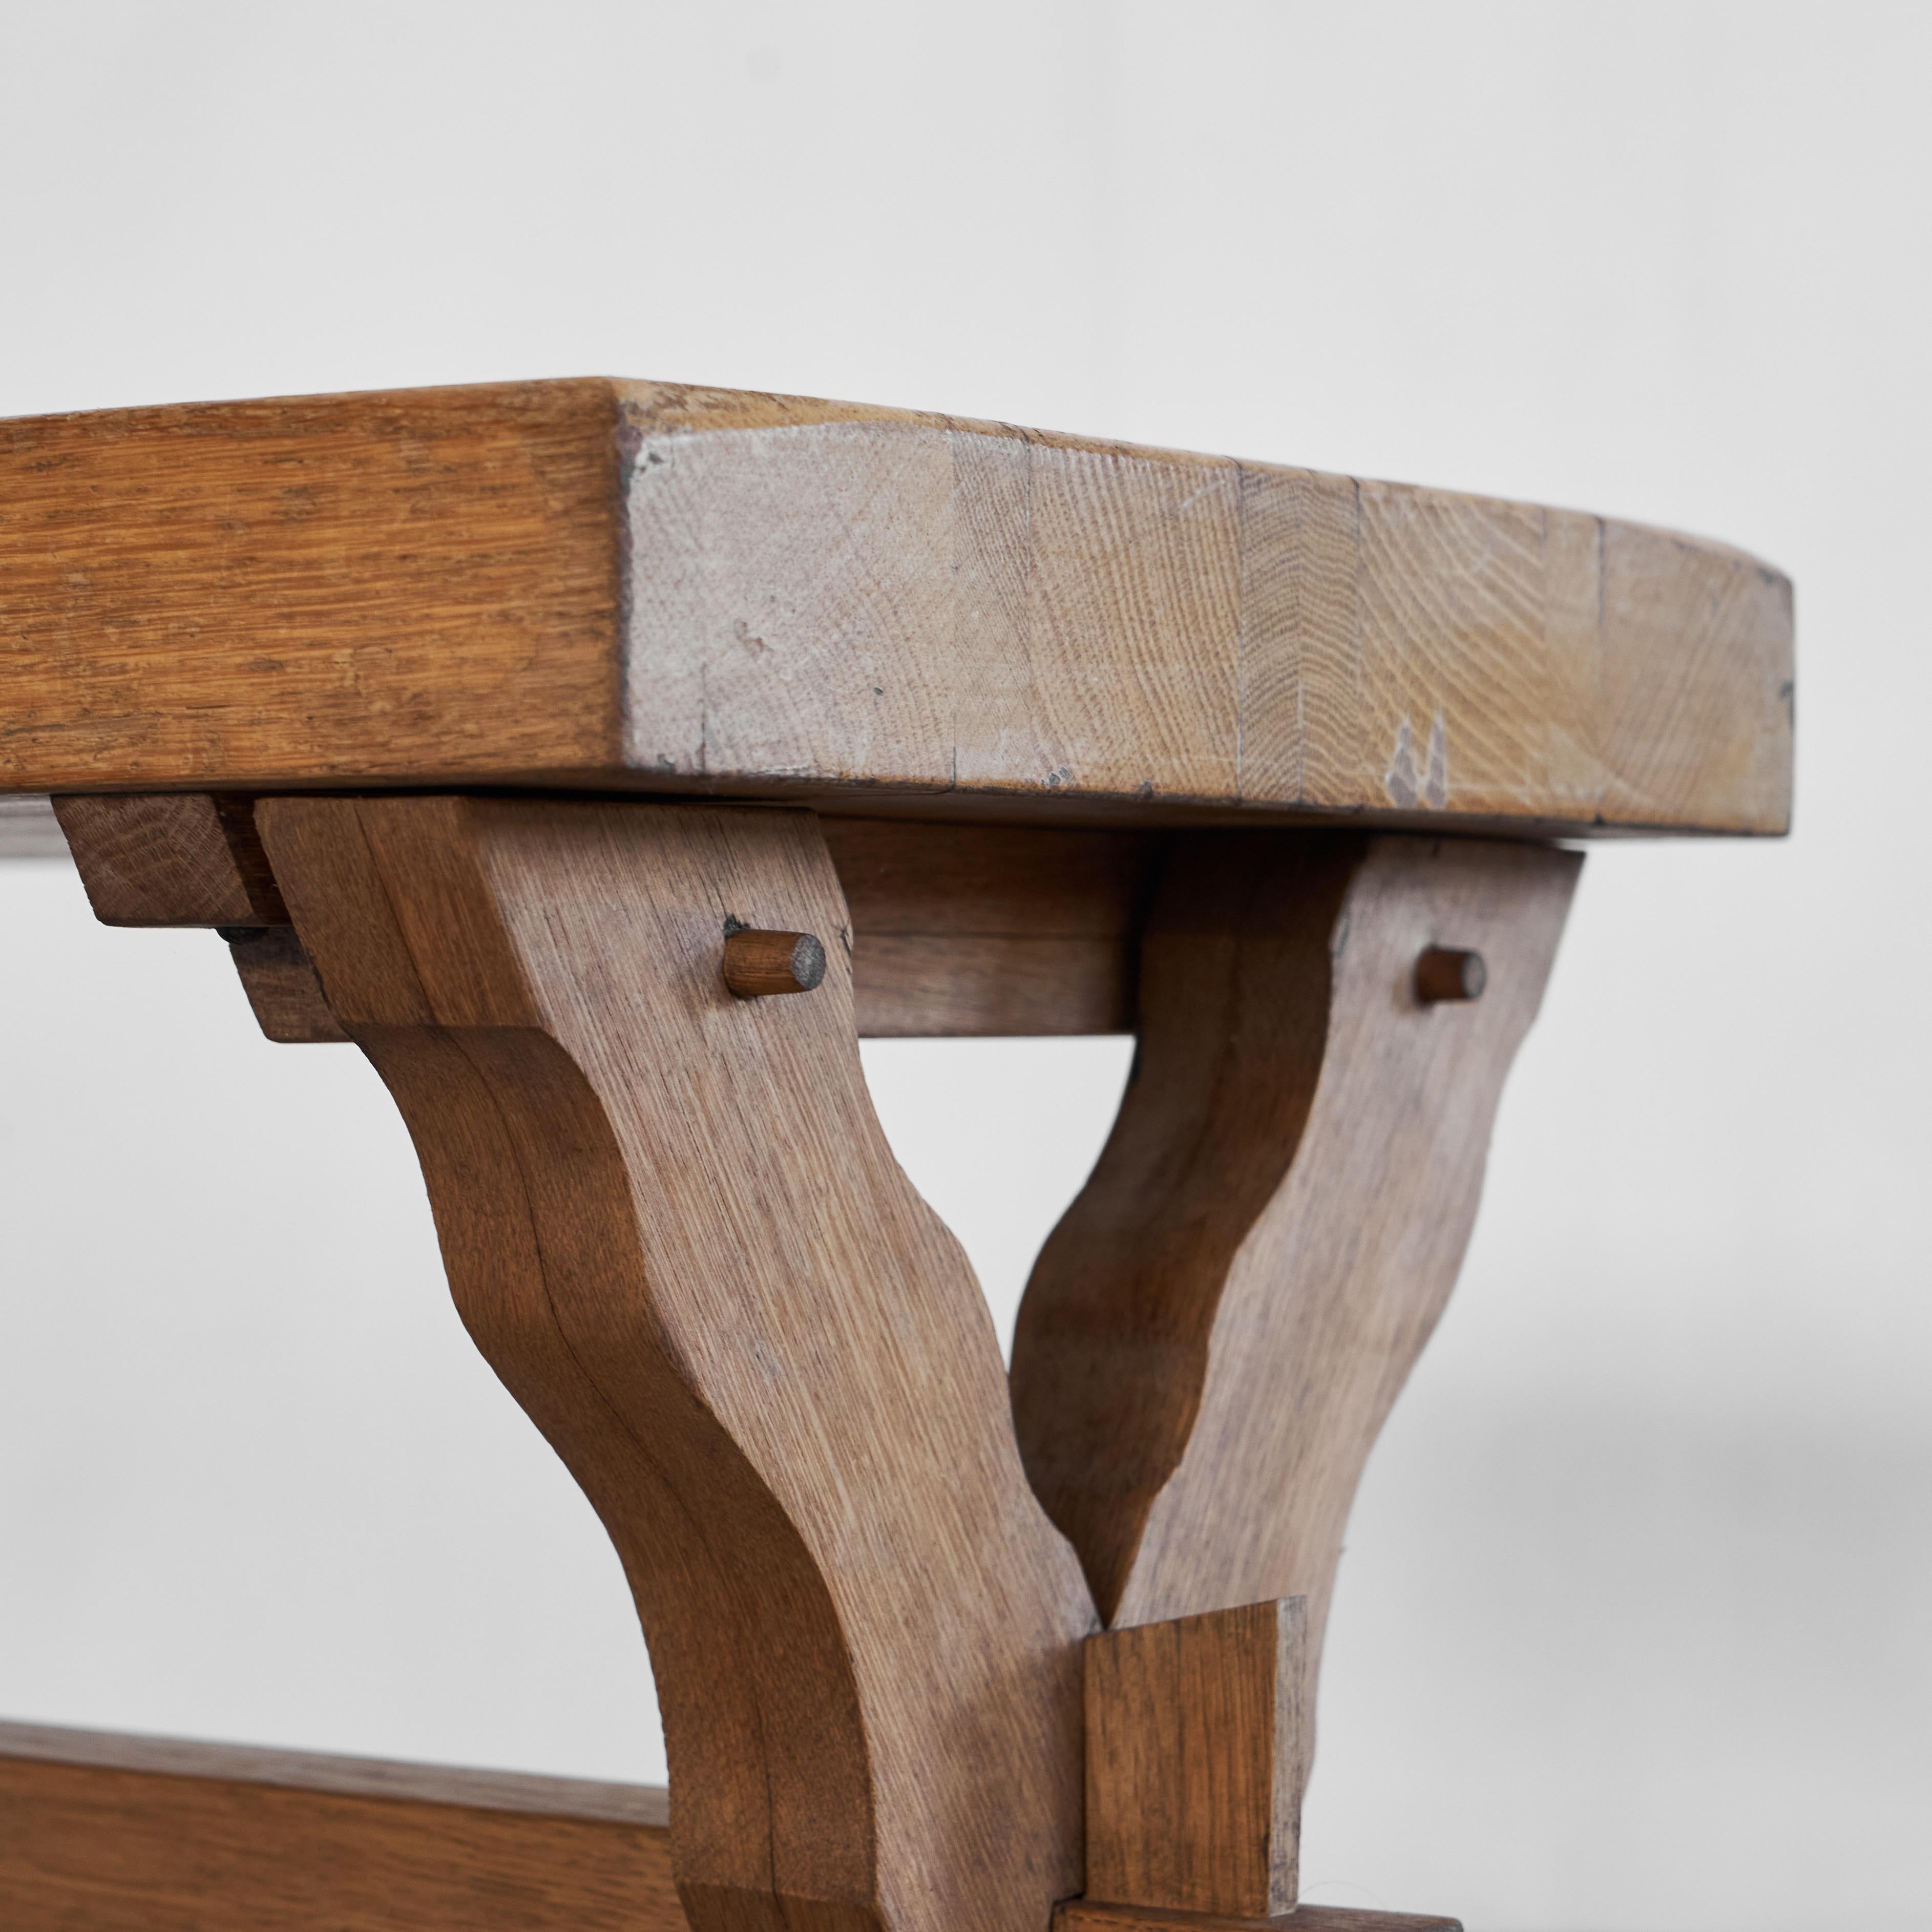 20th Century Sculptural Cross Legged Side Table in Solid Wood 1940s For Sale